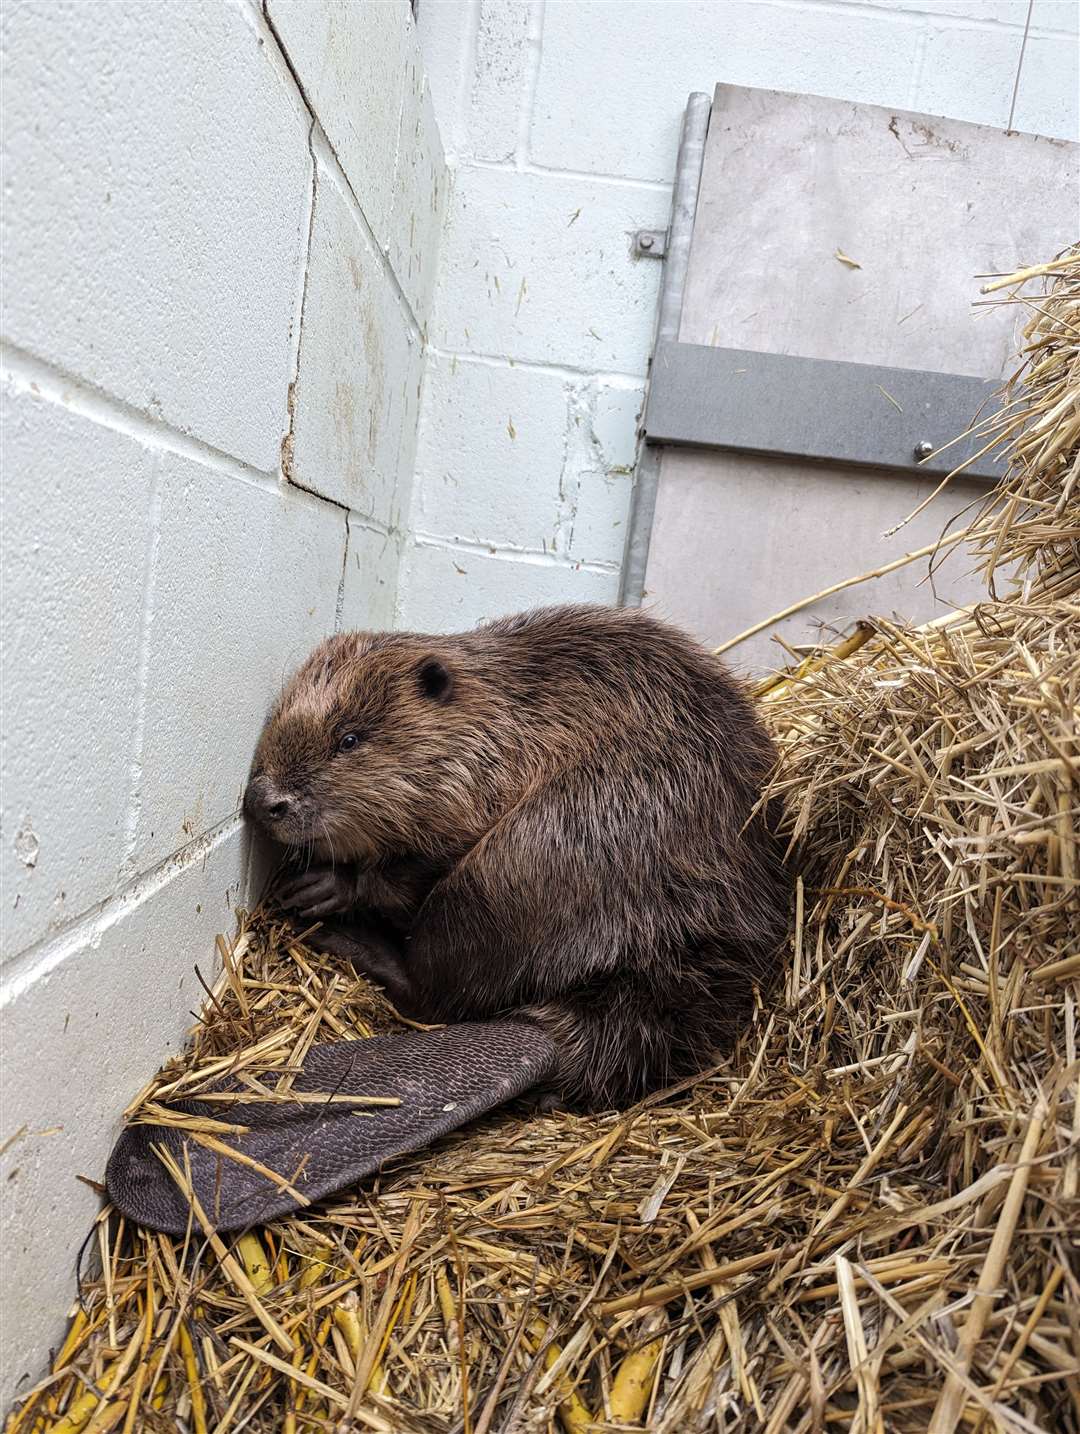 The beaver is recovering at RSPCA’s Mallydams Wood in East Sussex (RSPCA/PA)